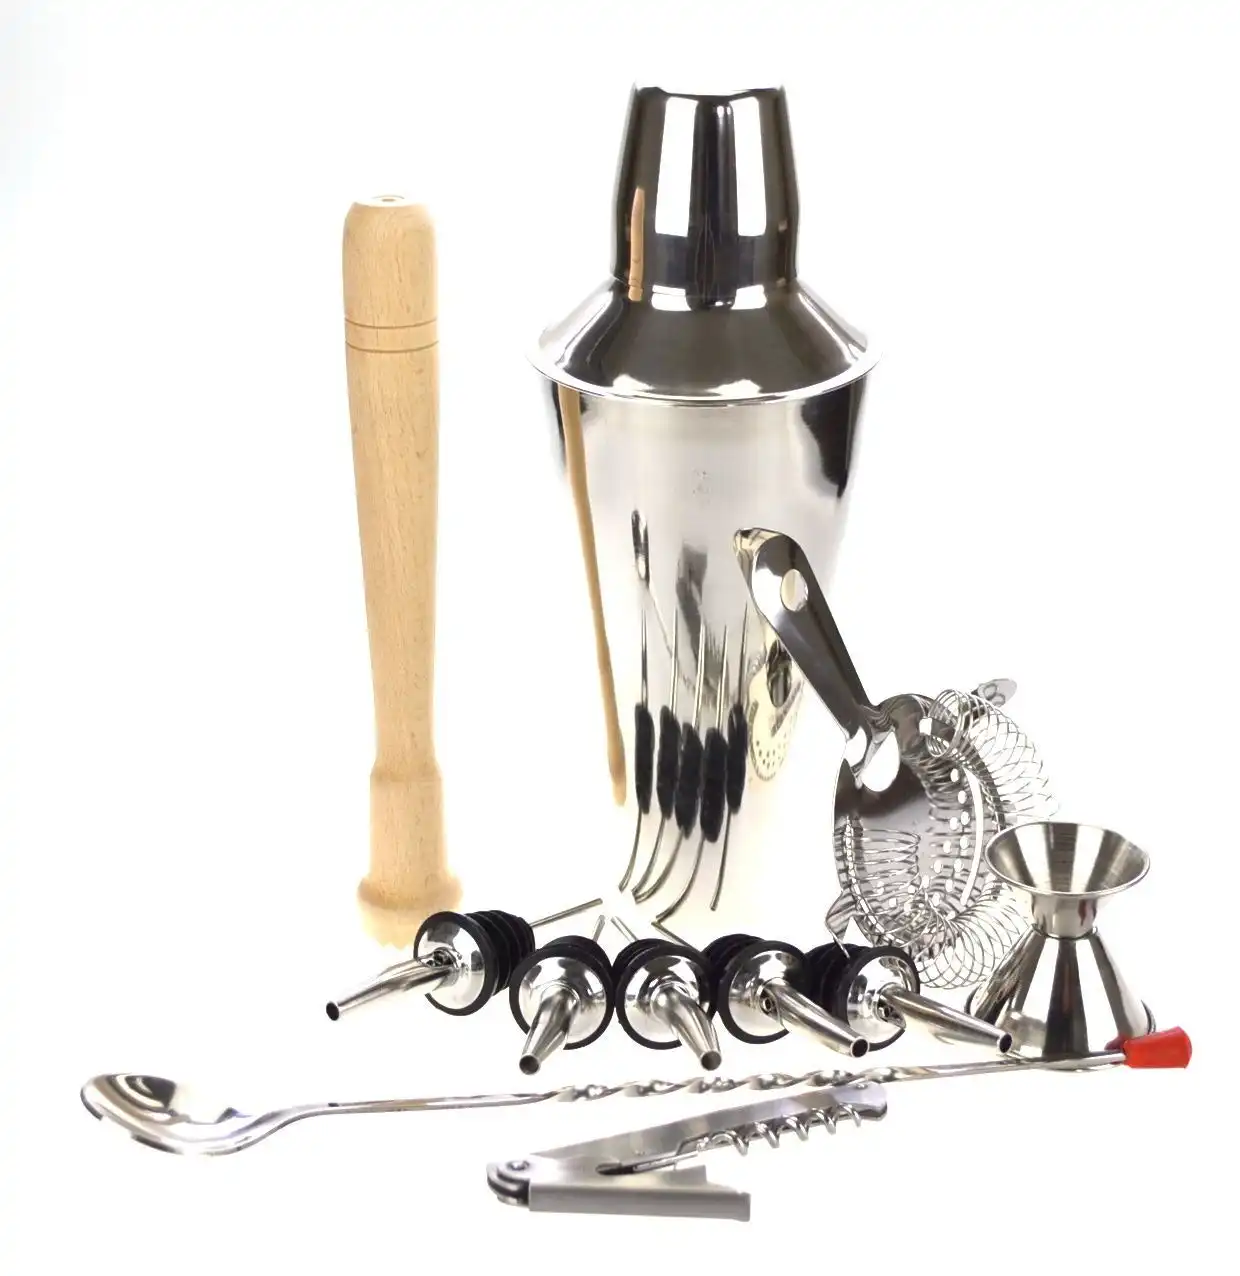 10 Piece Cocktail Shaker Set   With Free Waiters Friend